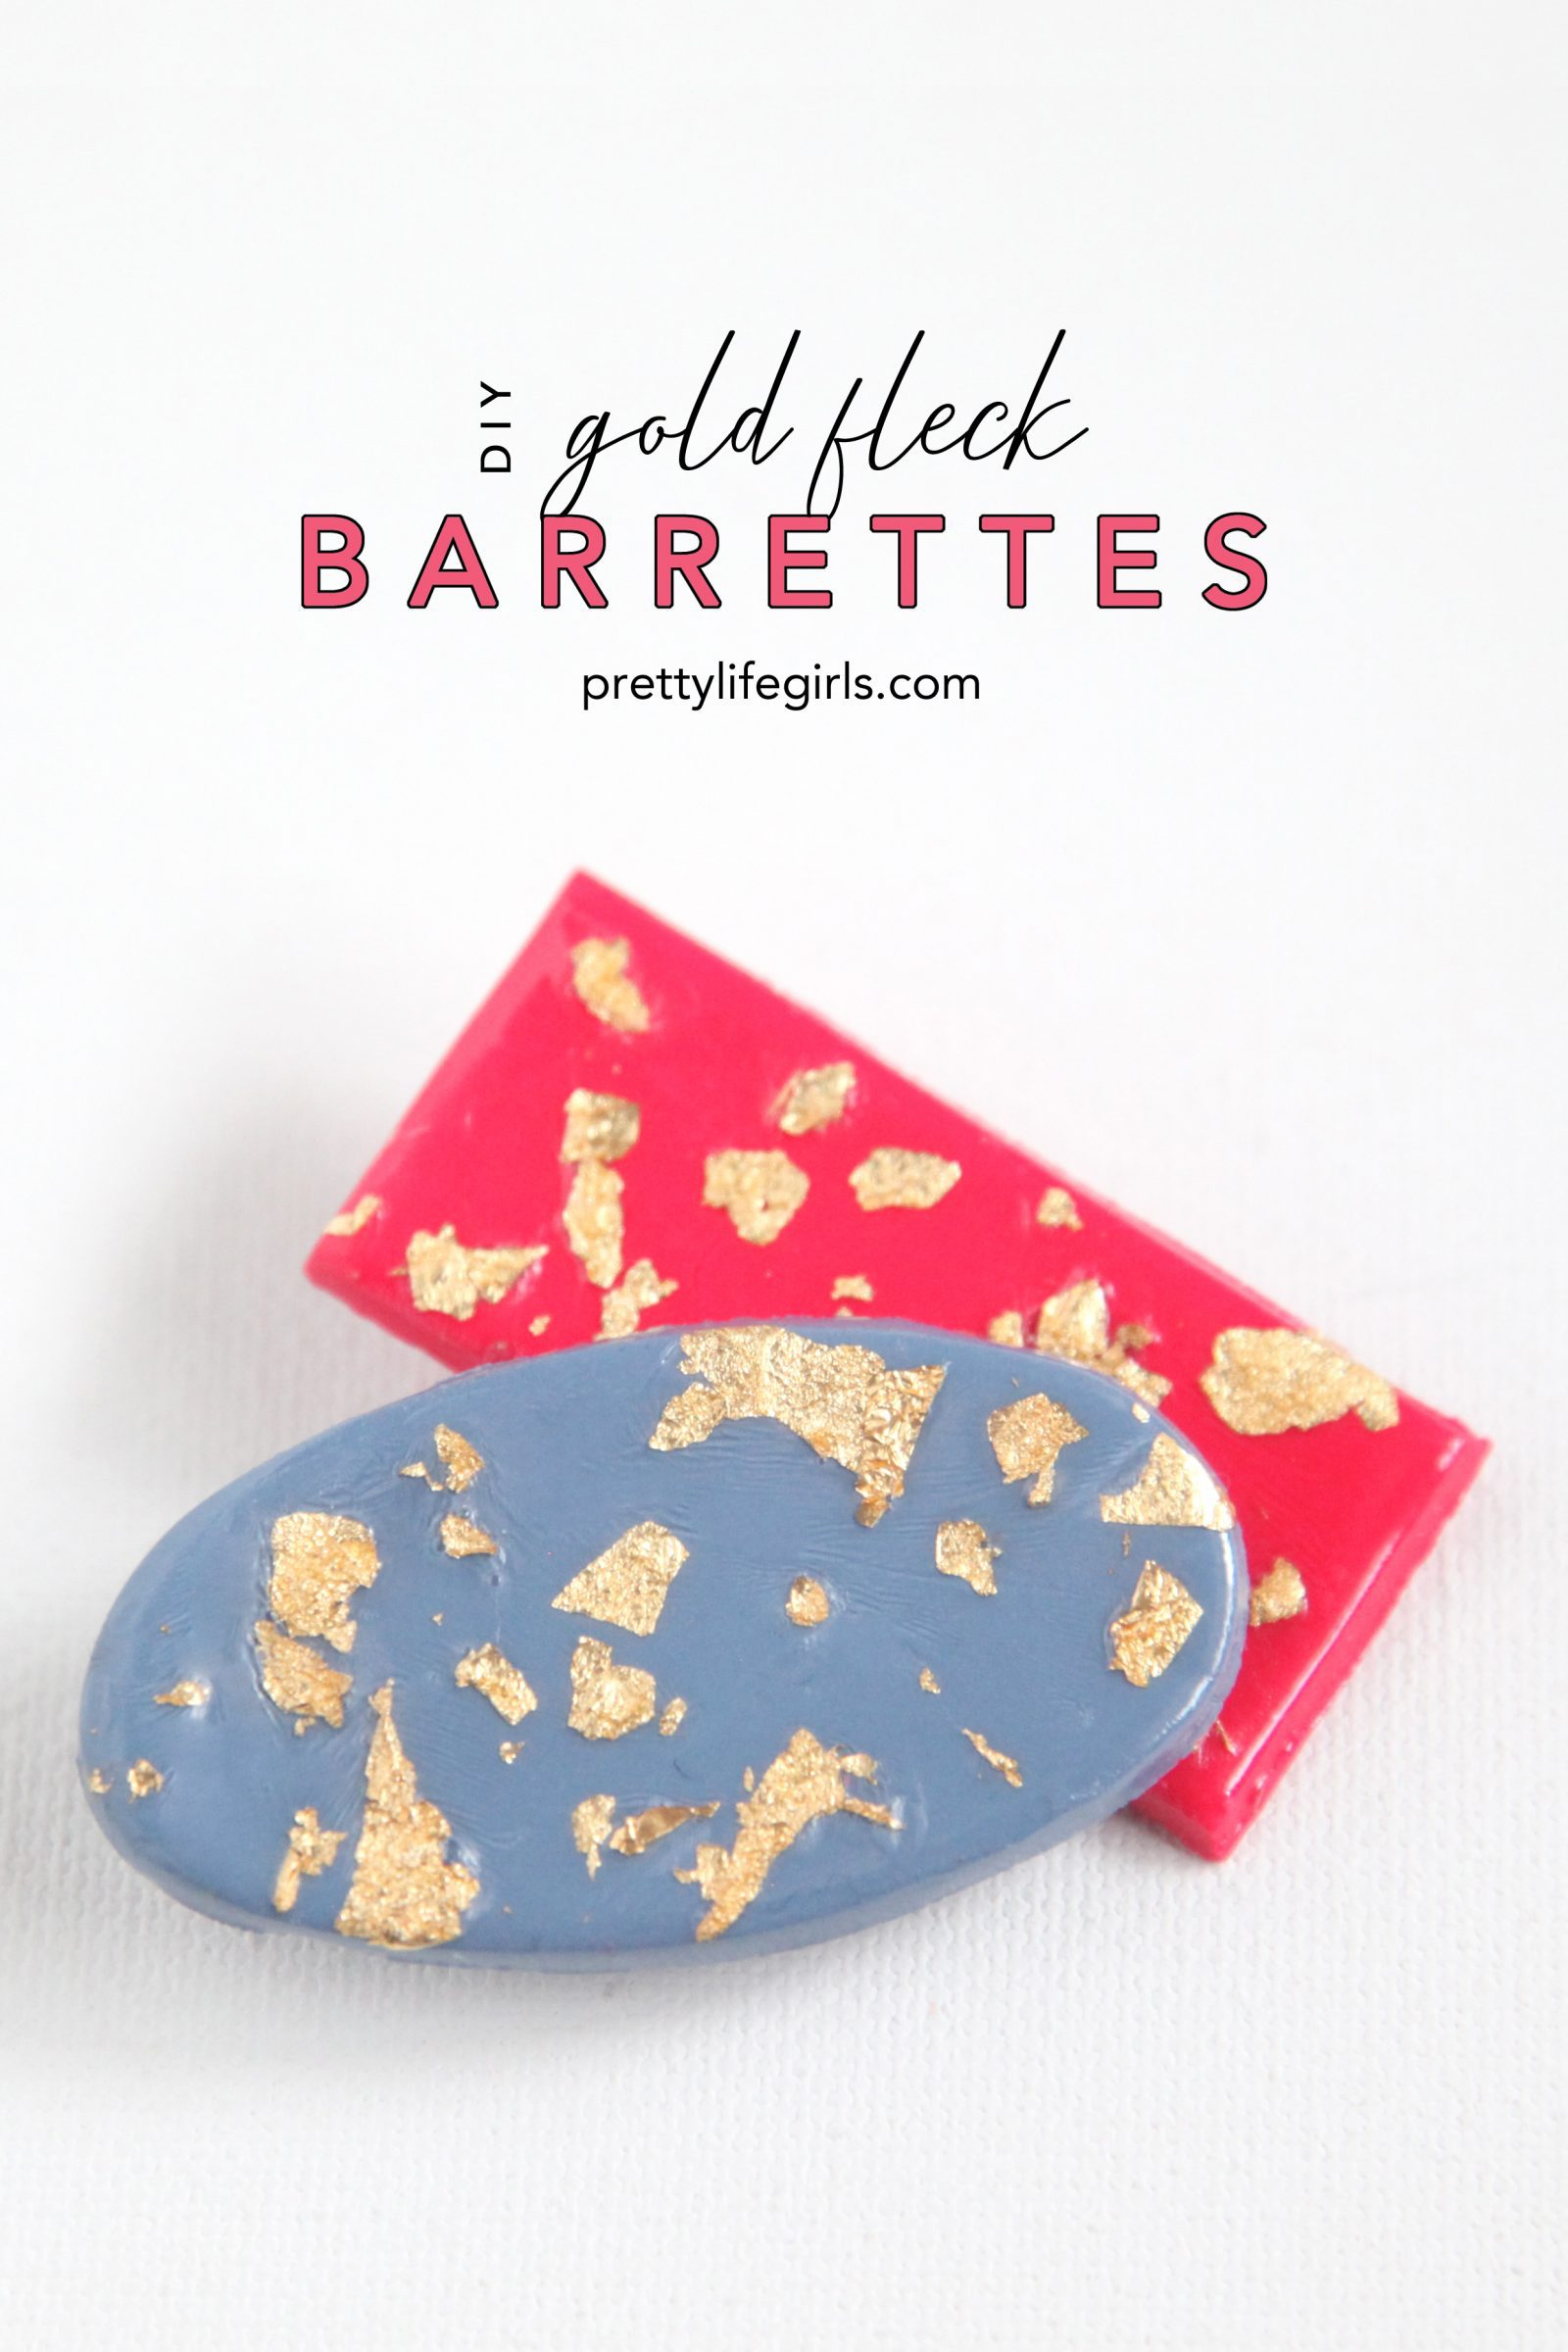 How to Make DIY Gold Fleck Barrettes + a tutorial featured by Top US Craft Blog + The Pretty Life Girls